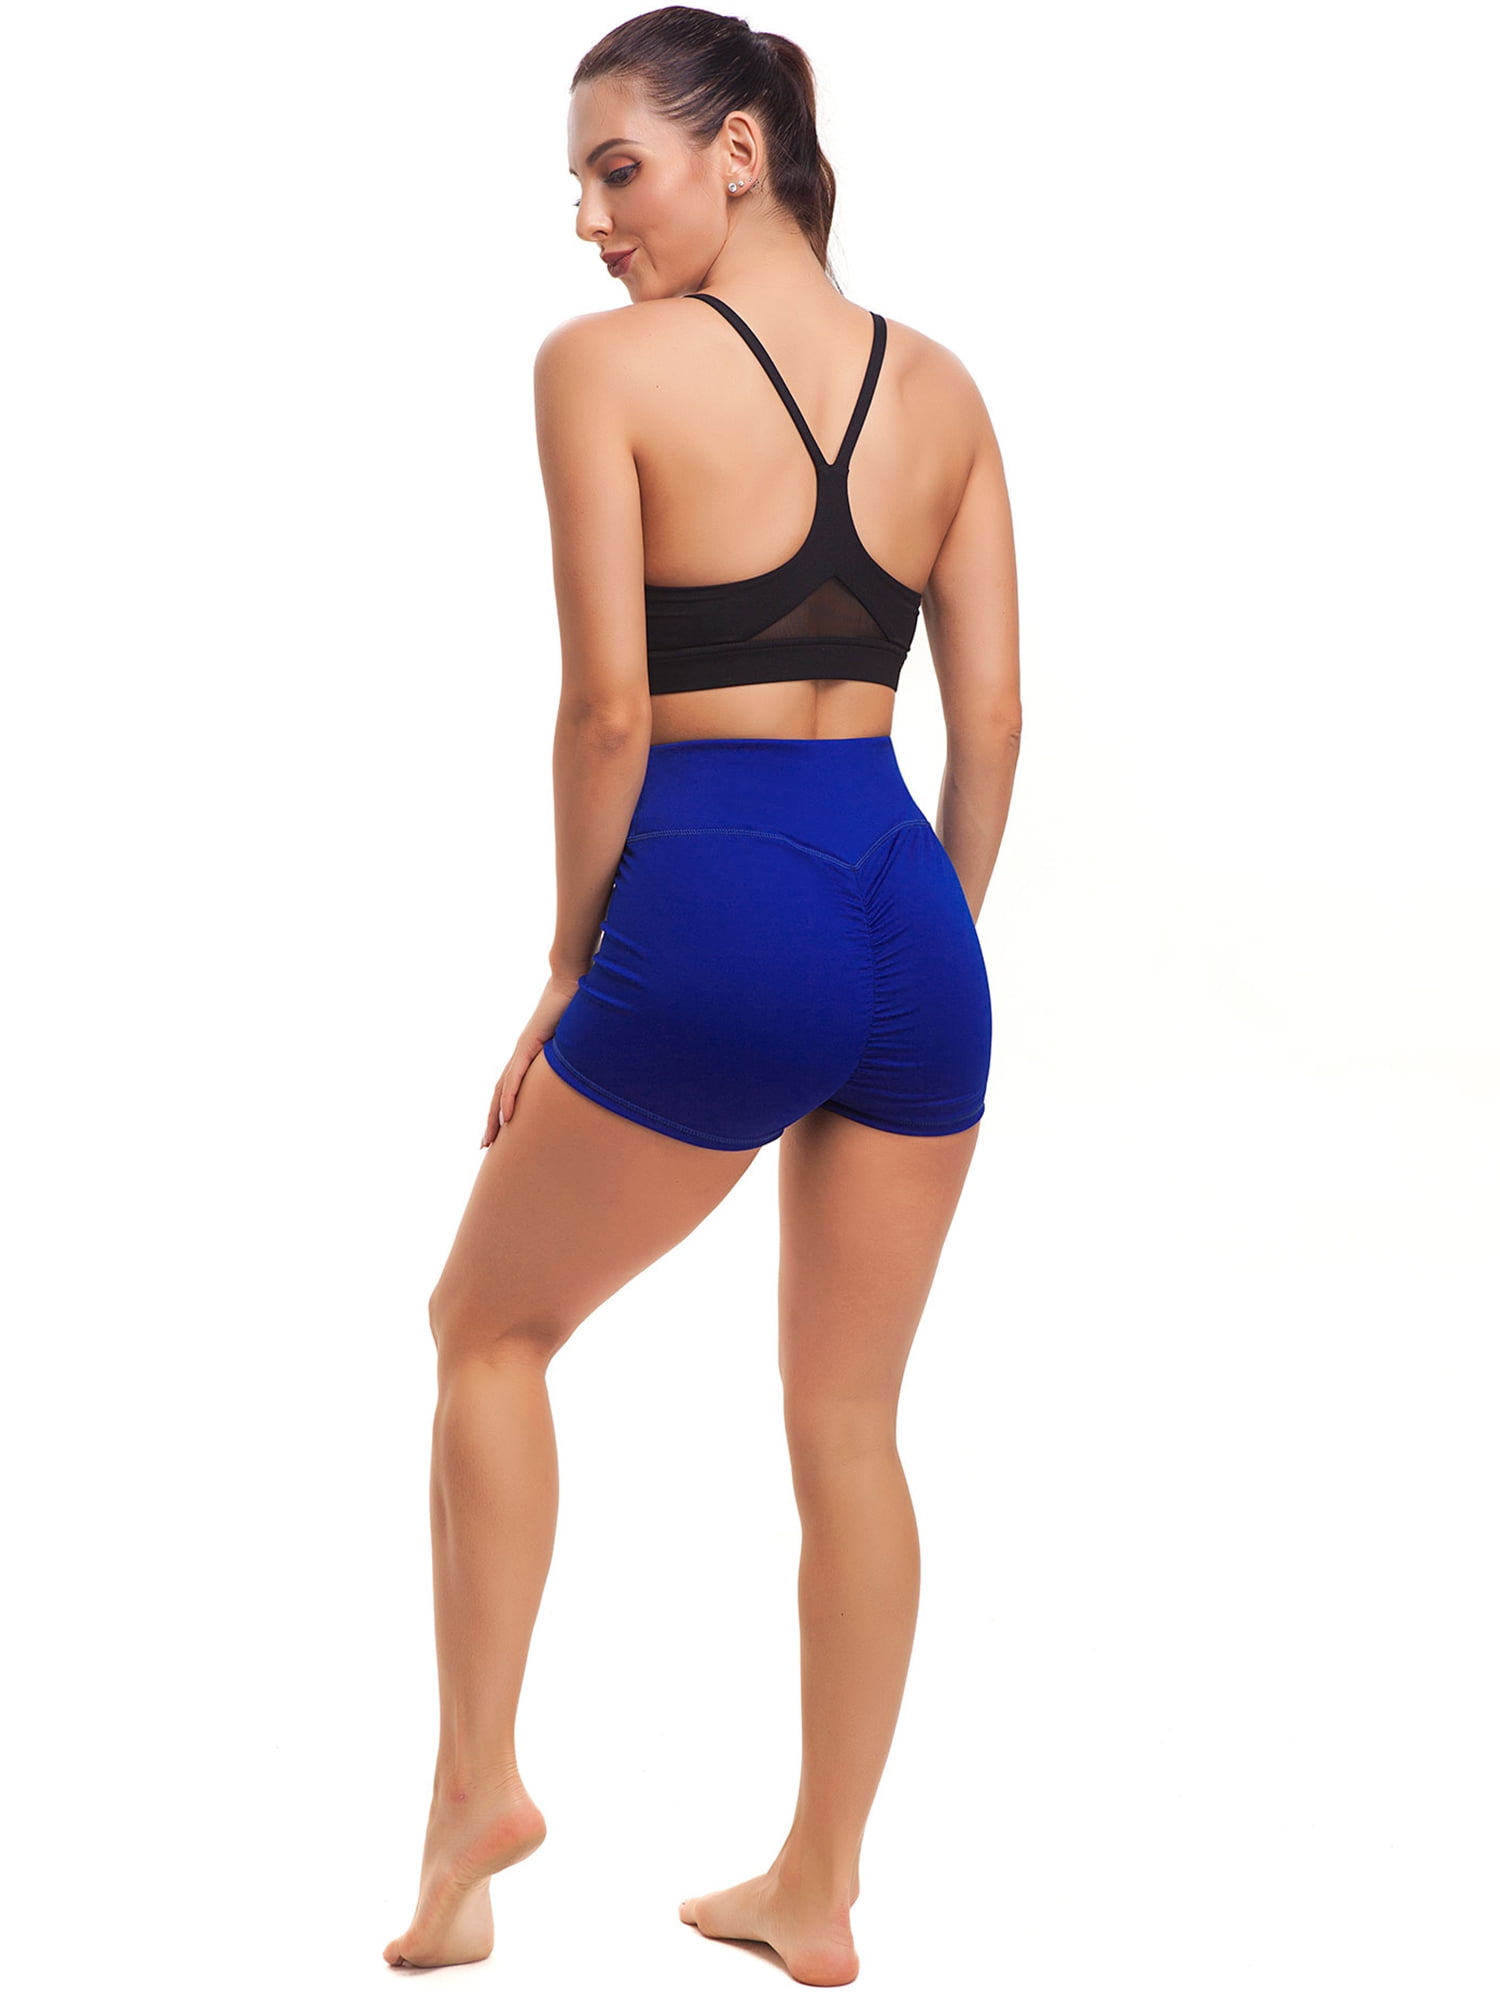 Yogalicious Hot Pants/shortsactive Wear Yoga, Pole Dancing, Training,  Bootcamp, Crossfit, F45, Running, Surfing, Swimming, Fitness, Barre -   Canada